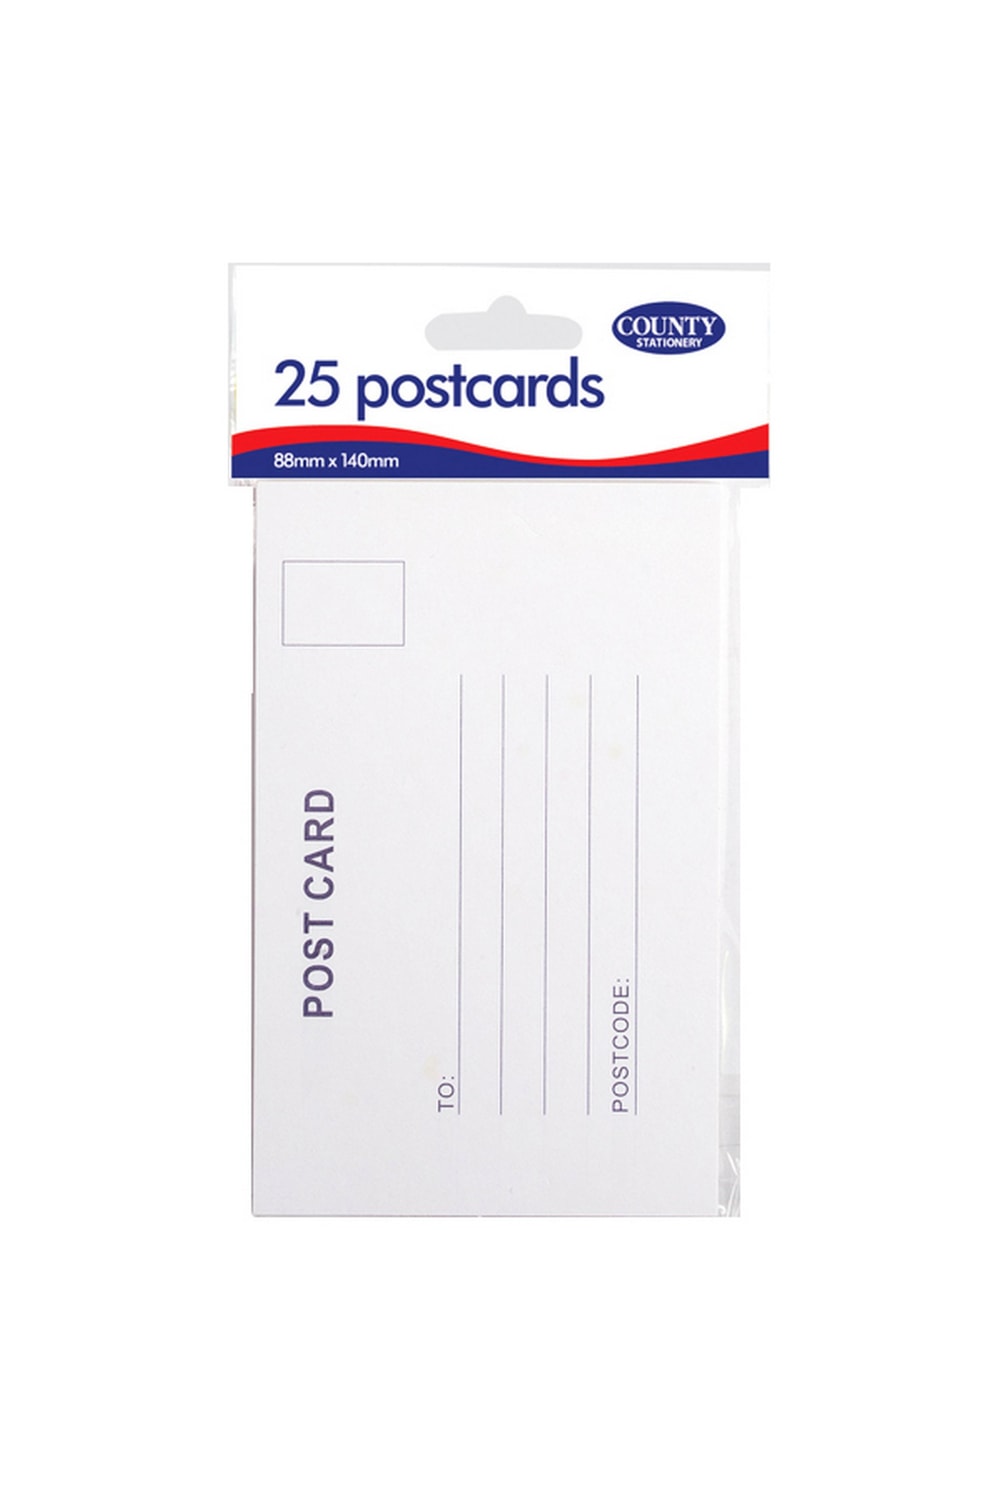 County Stationery Plain White Post Cards (12 Packs Of 25) (White) (One Size)